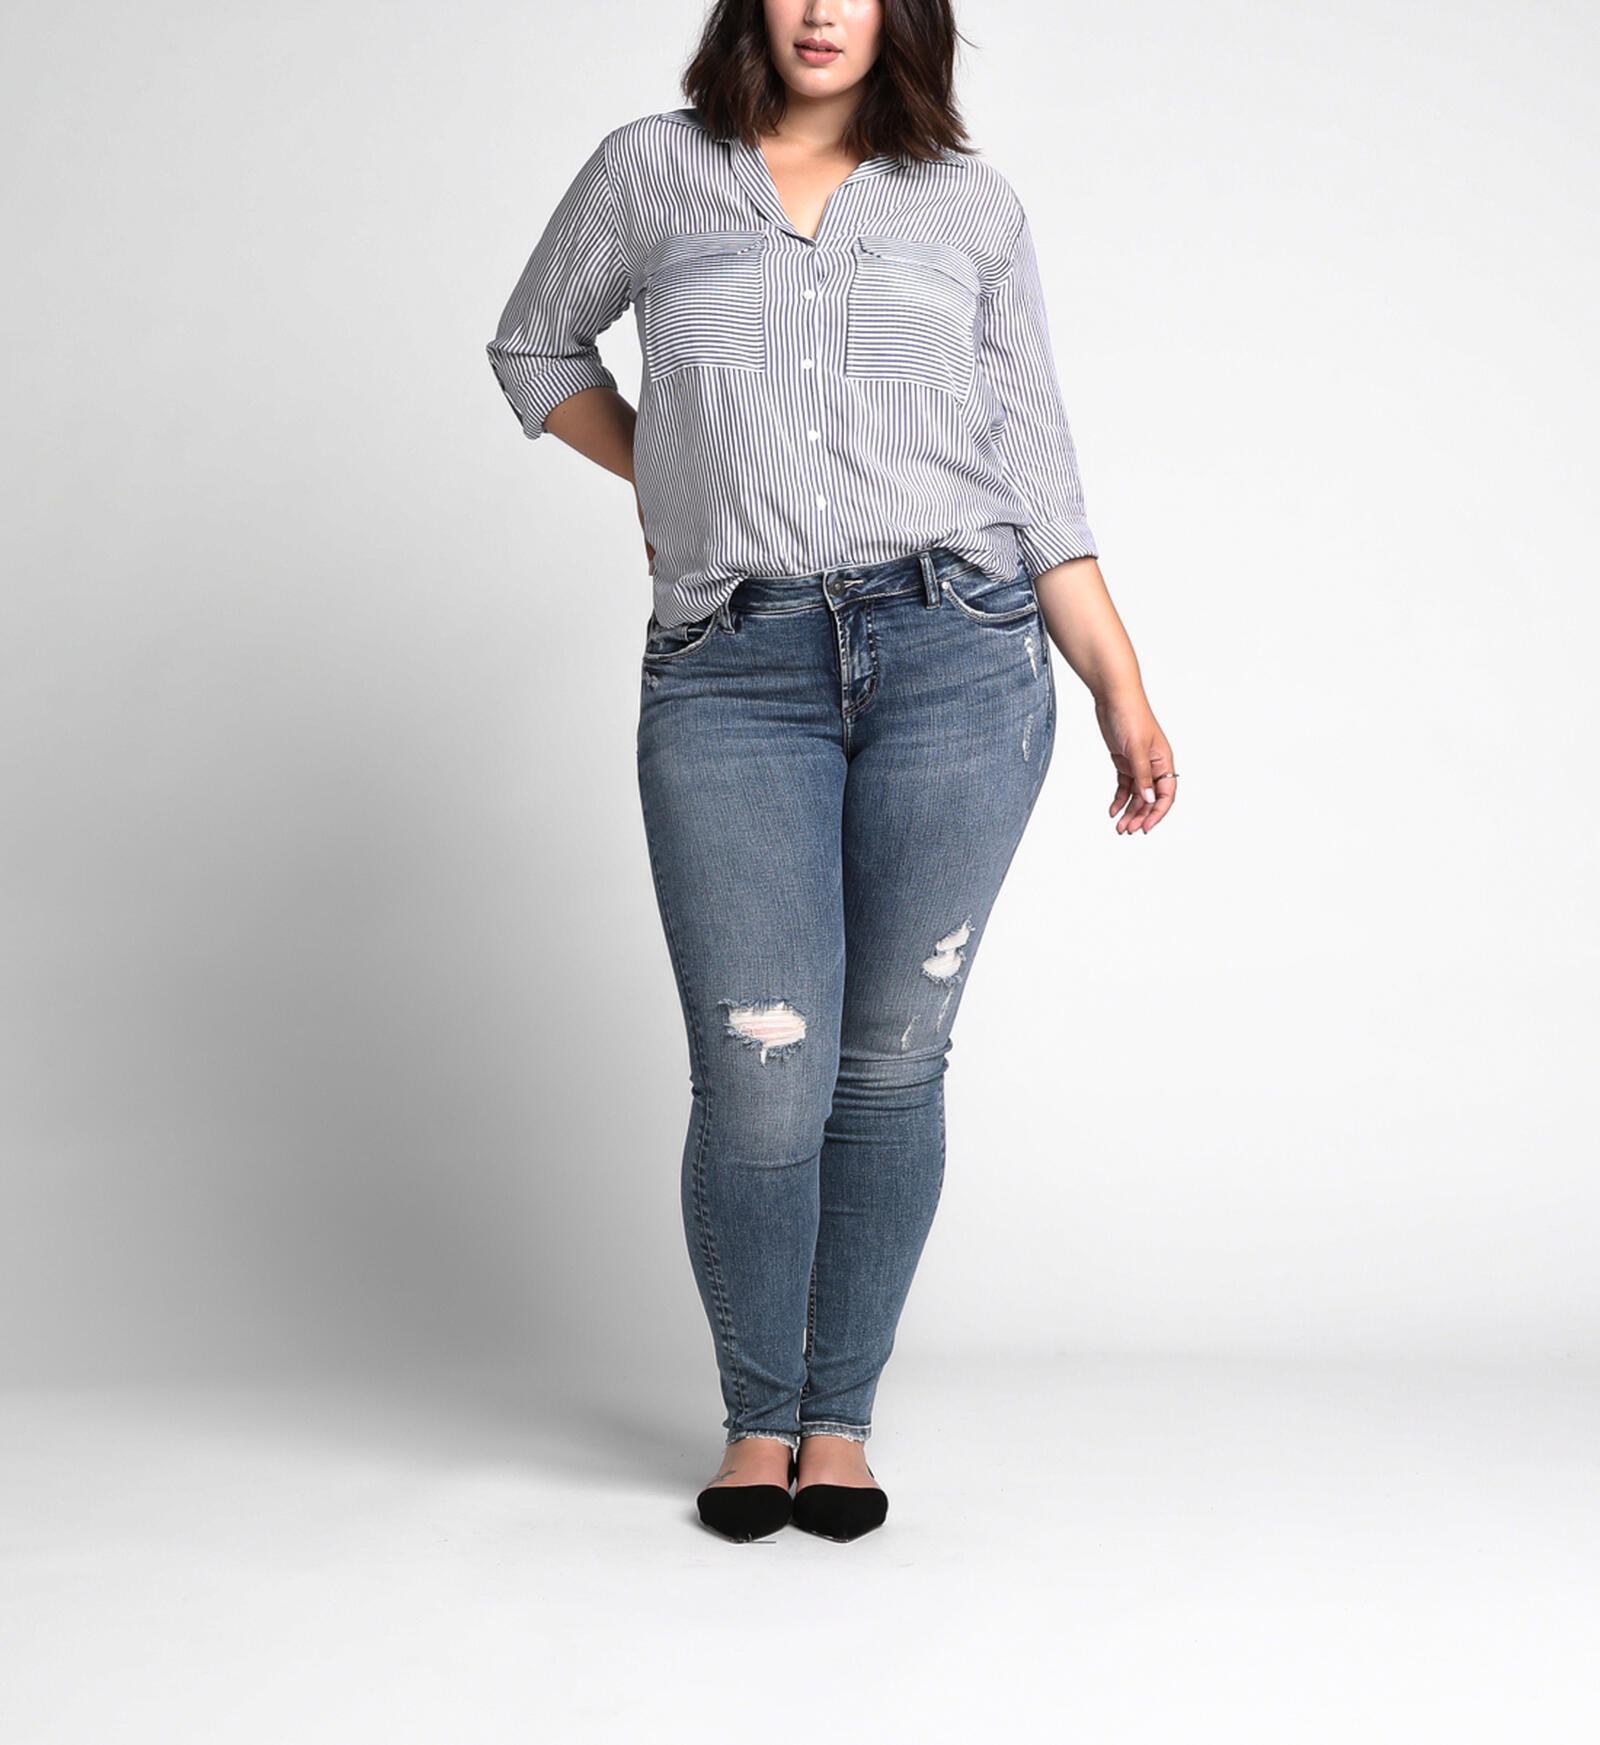 Buy Suki Mid Rise Super Skinny Jeans Plus Size for USD 109.00 | Silver Jeans US